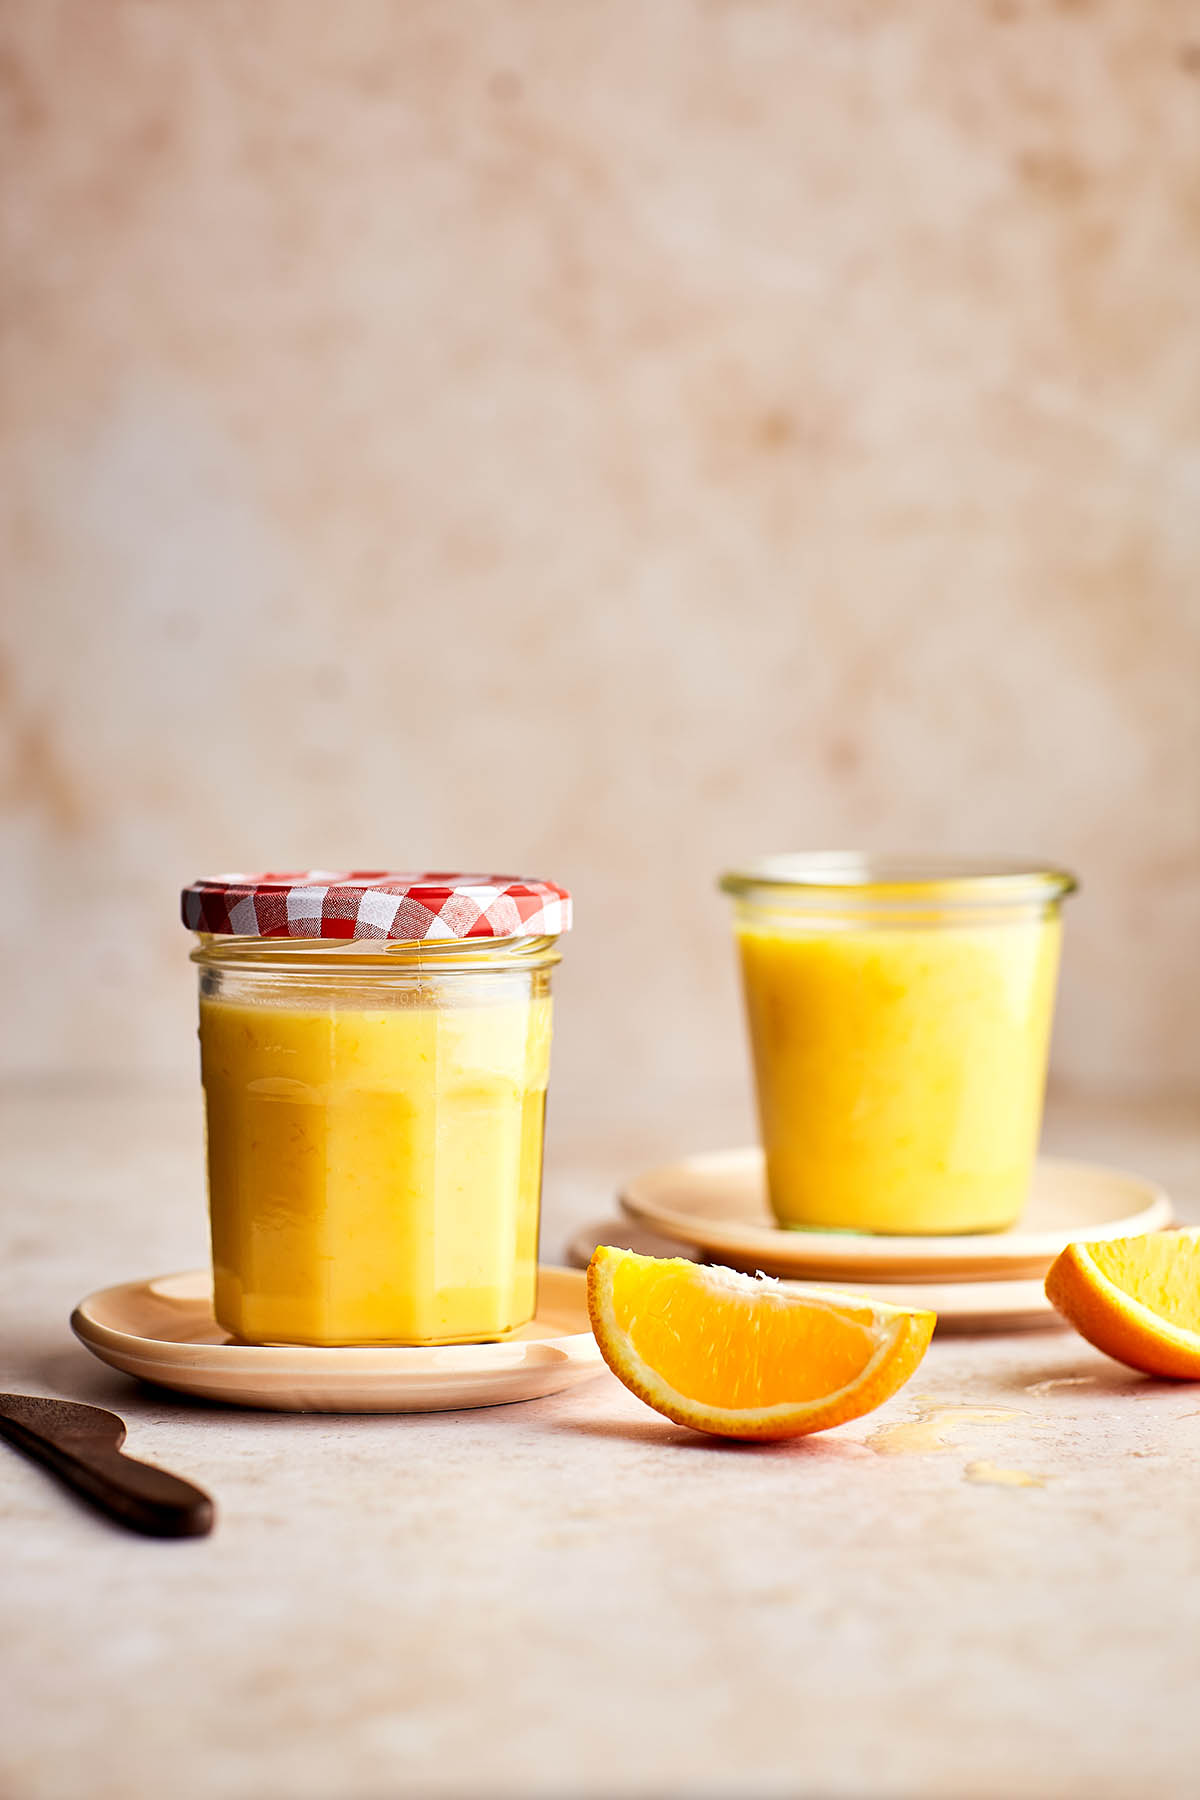 Two jars of orange curd on plates with slices of oranges nearby.